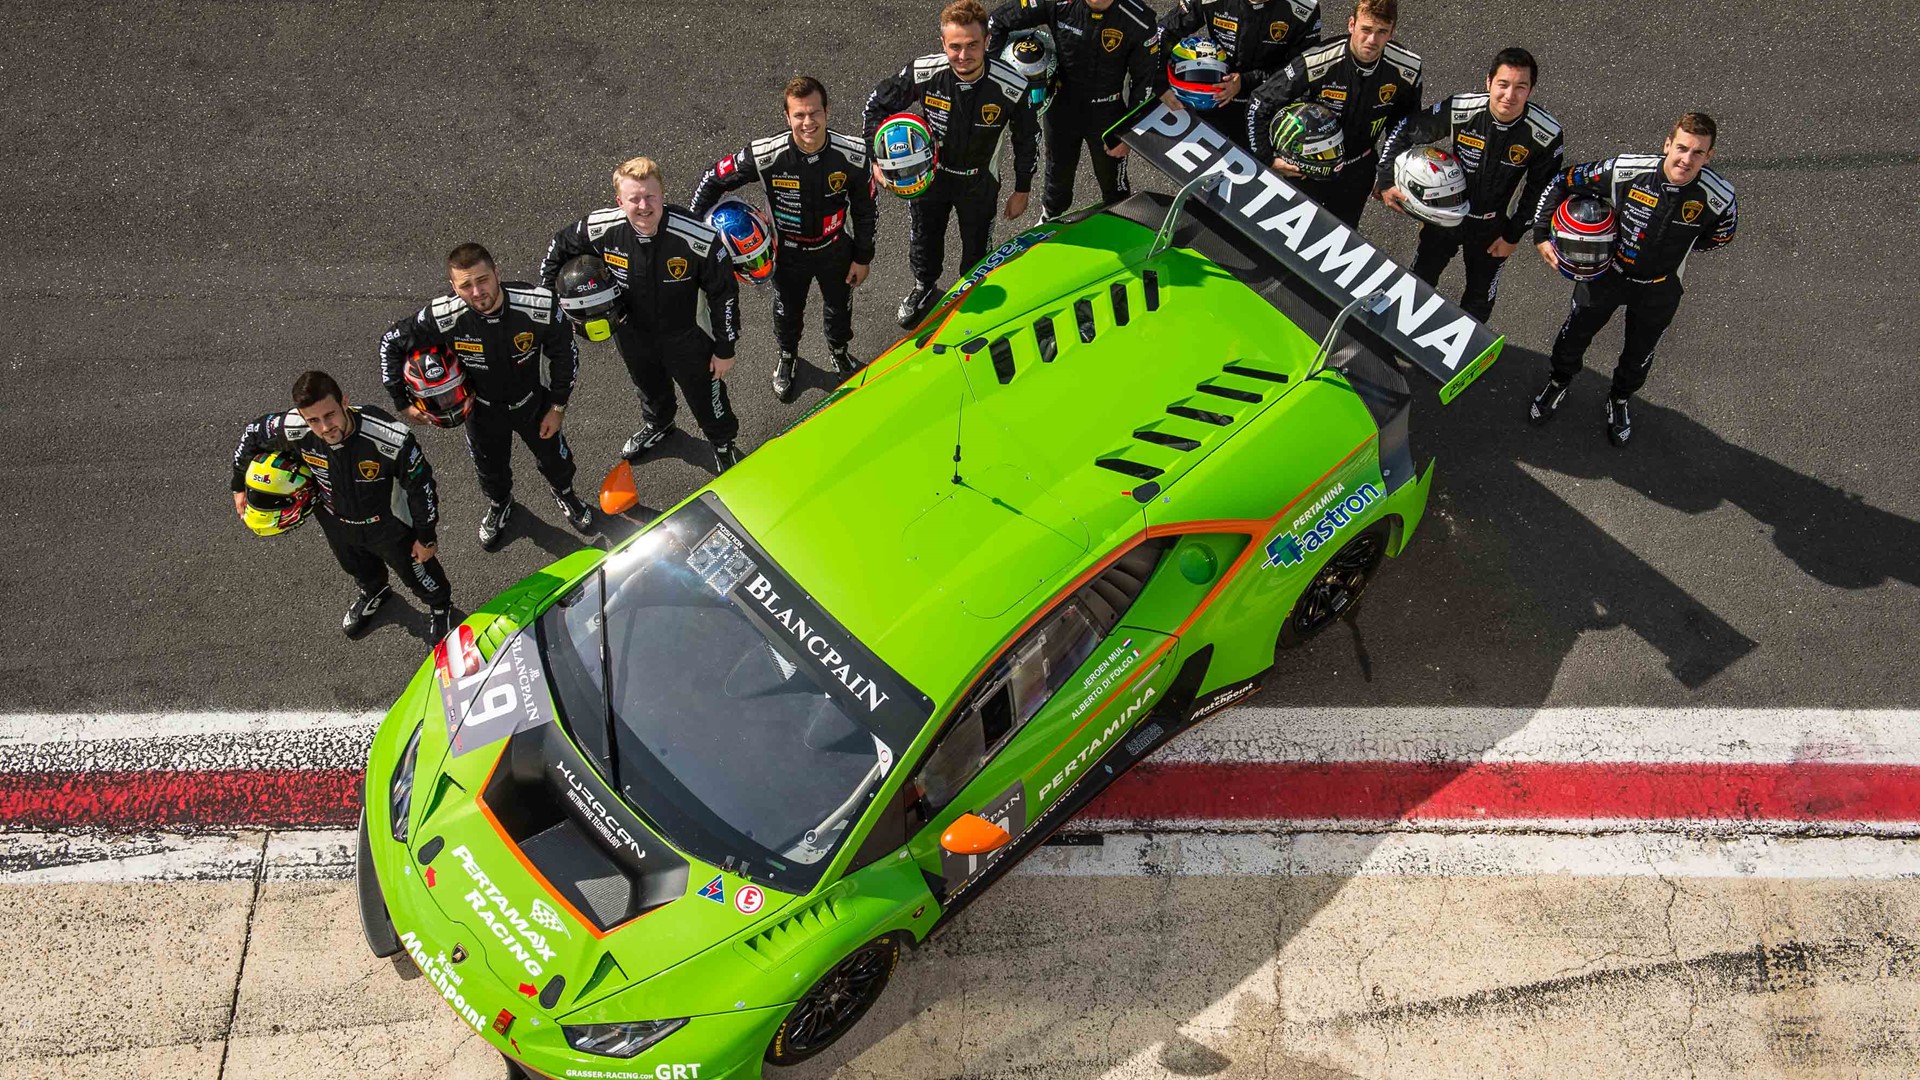 Lamborghini Squadra Corse back on track in Vallelunga with the Young  Drivers and GT3 Junior Programs